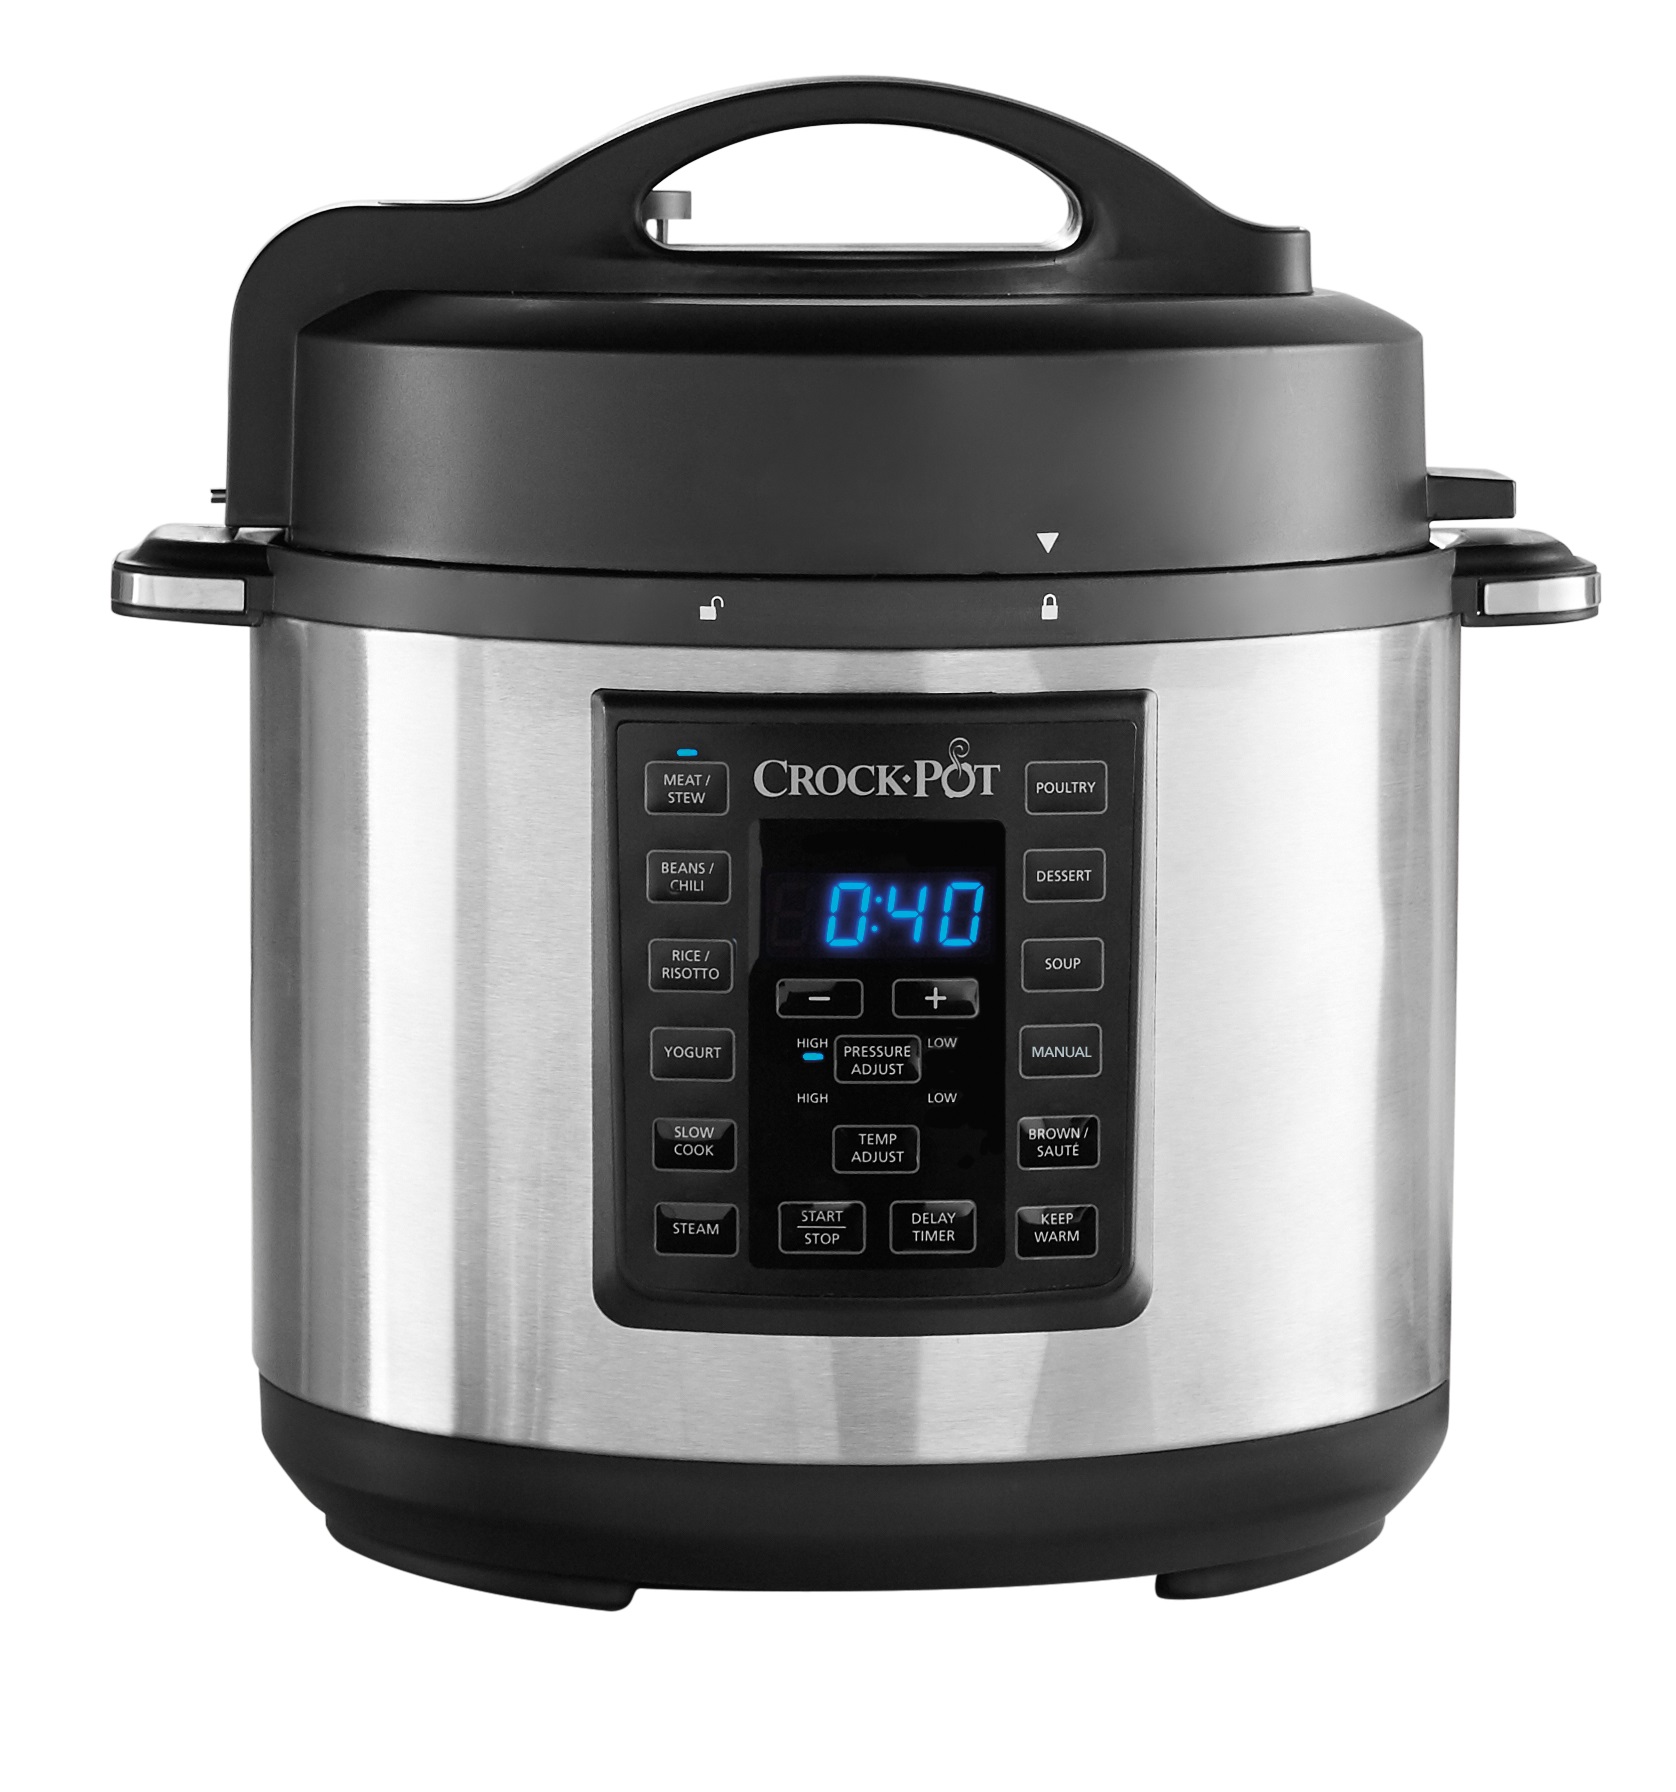 Crock Pot Express Pressure Cooker | Free shipping from €99 on ...